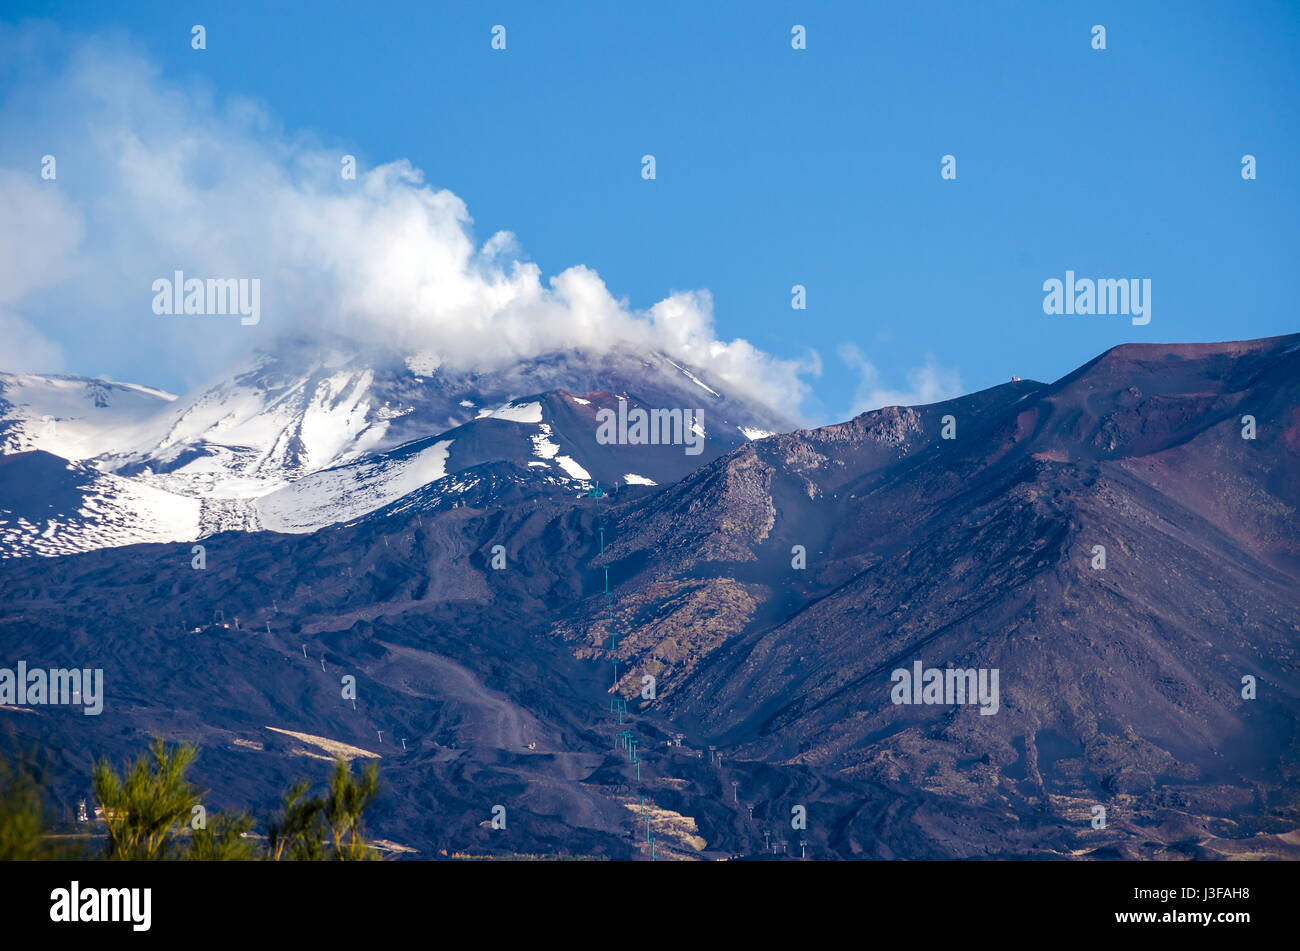 Mount Etna, an active stratovolcano, from the south with the smoking peak, snowy flanks, a lateral crater in the centre and a cable car line in the Pr Stock Photo